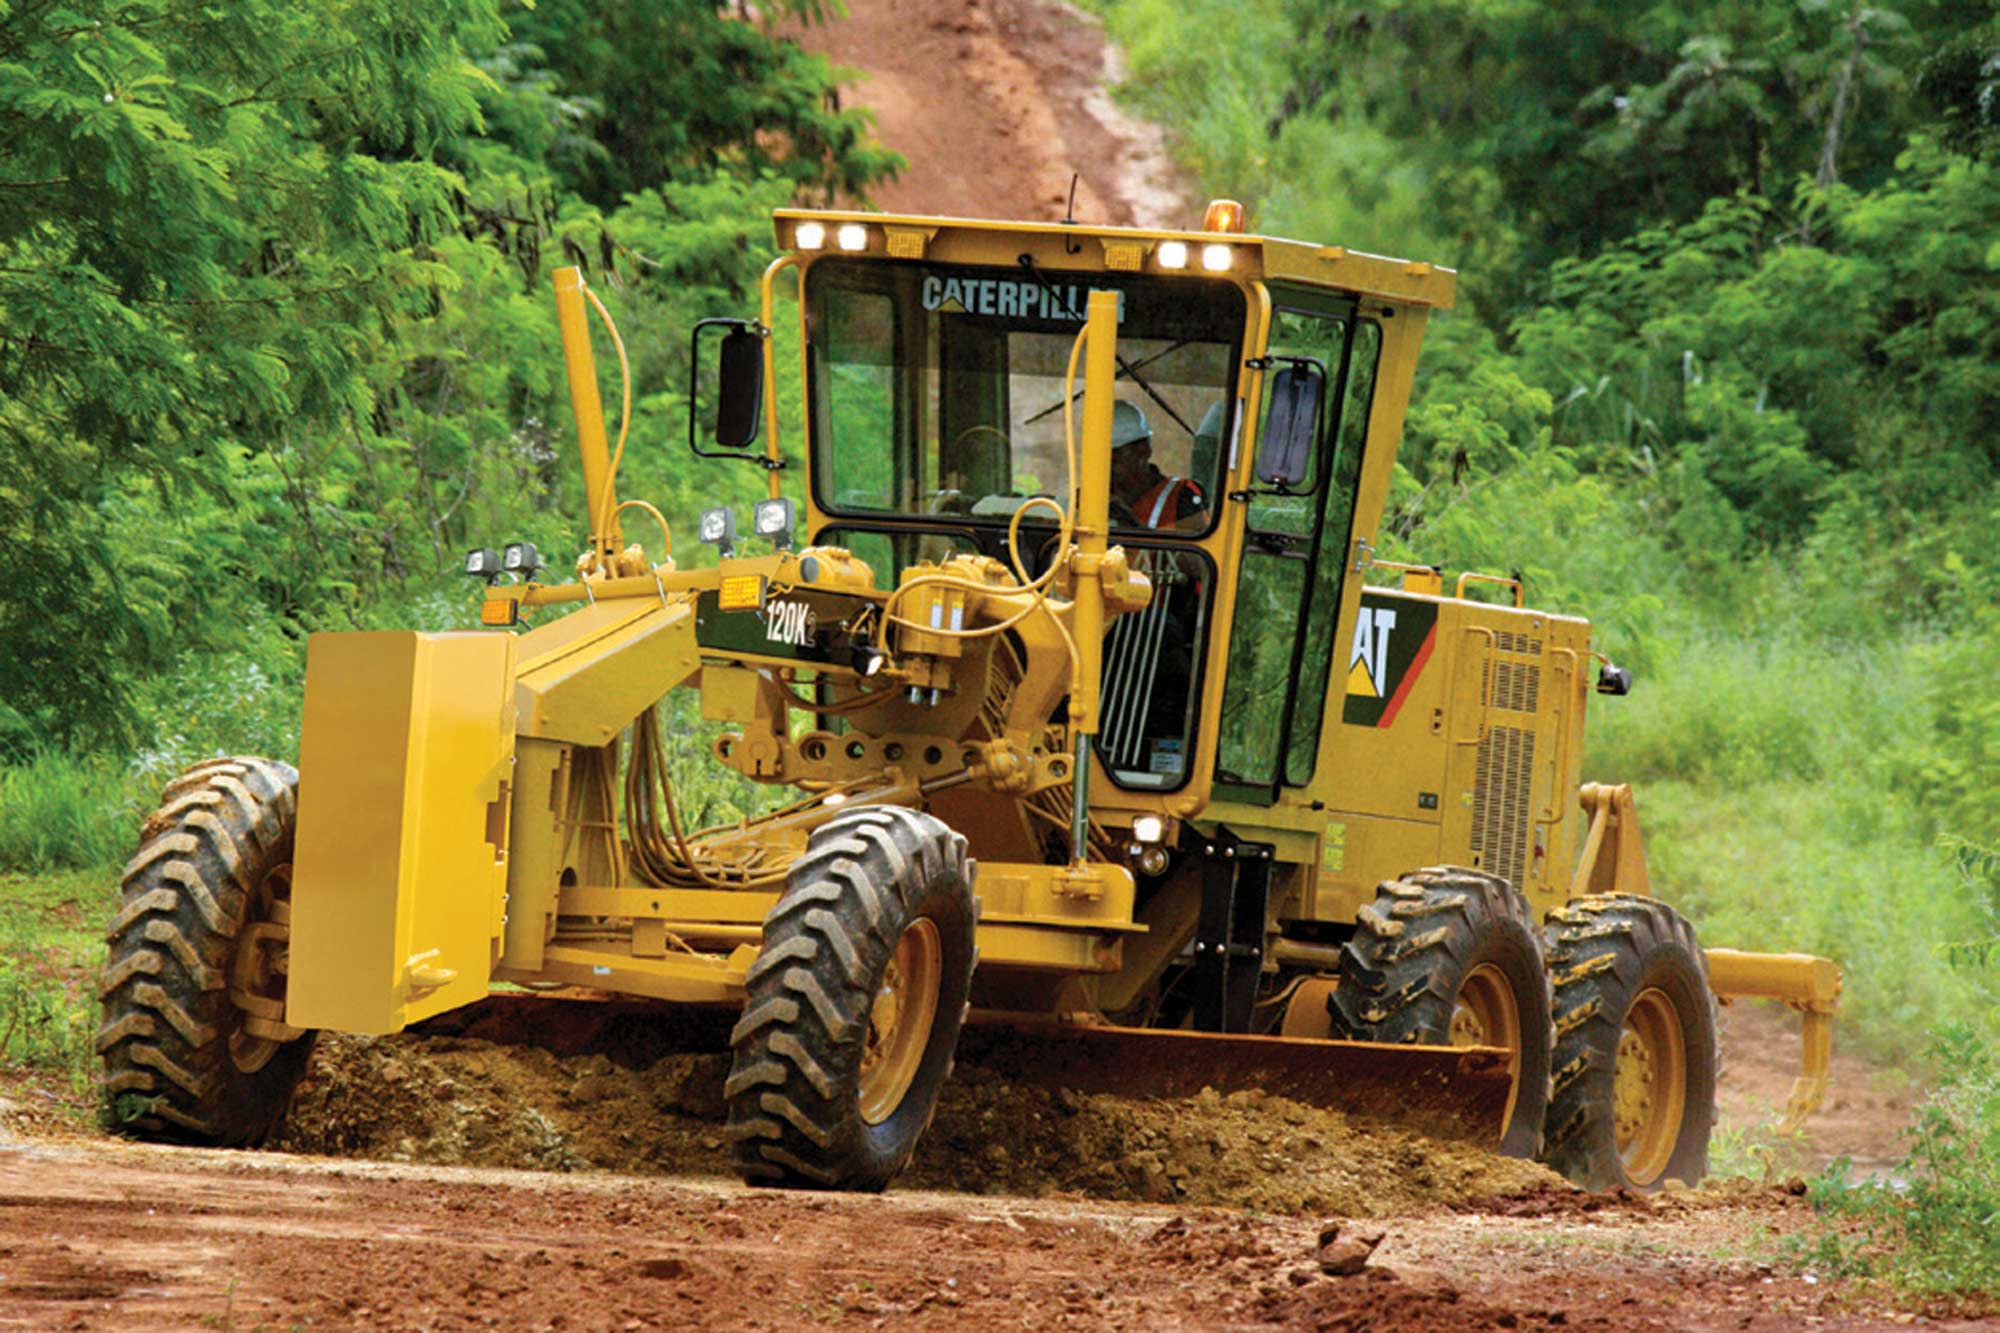 Caterpillar road equipment caters to varying customer needs B2B Purchase Construction